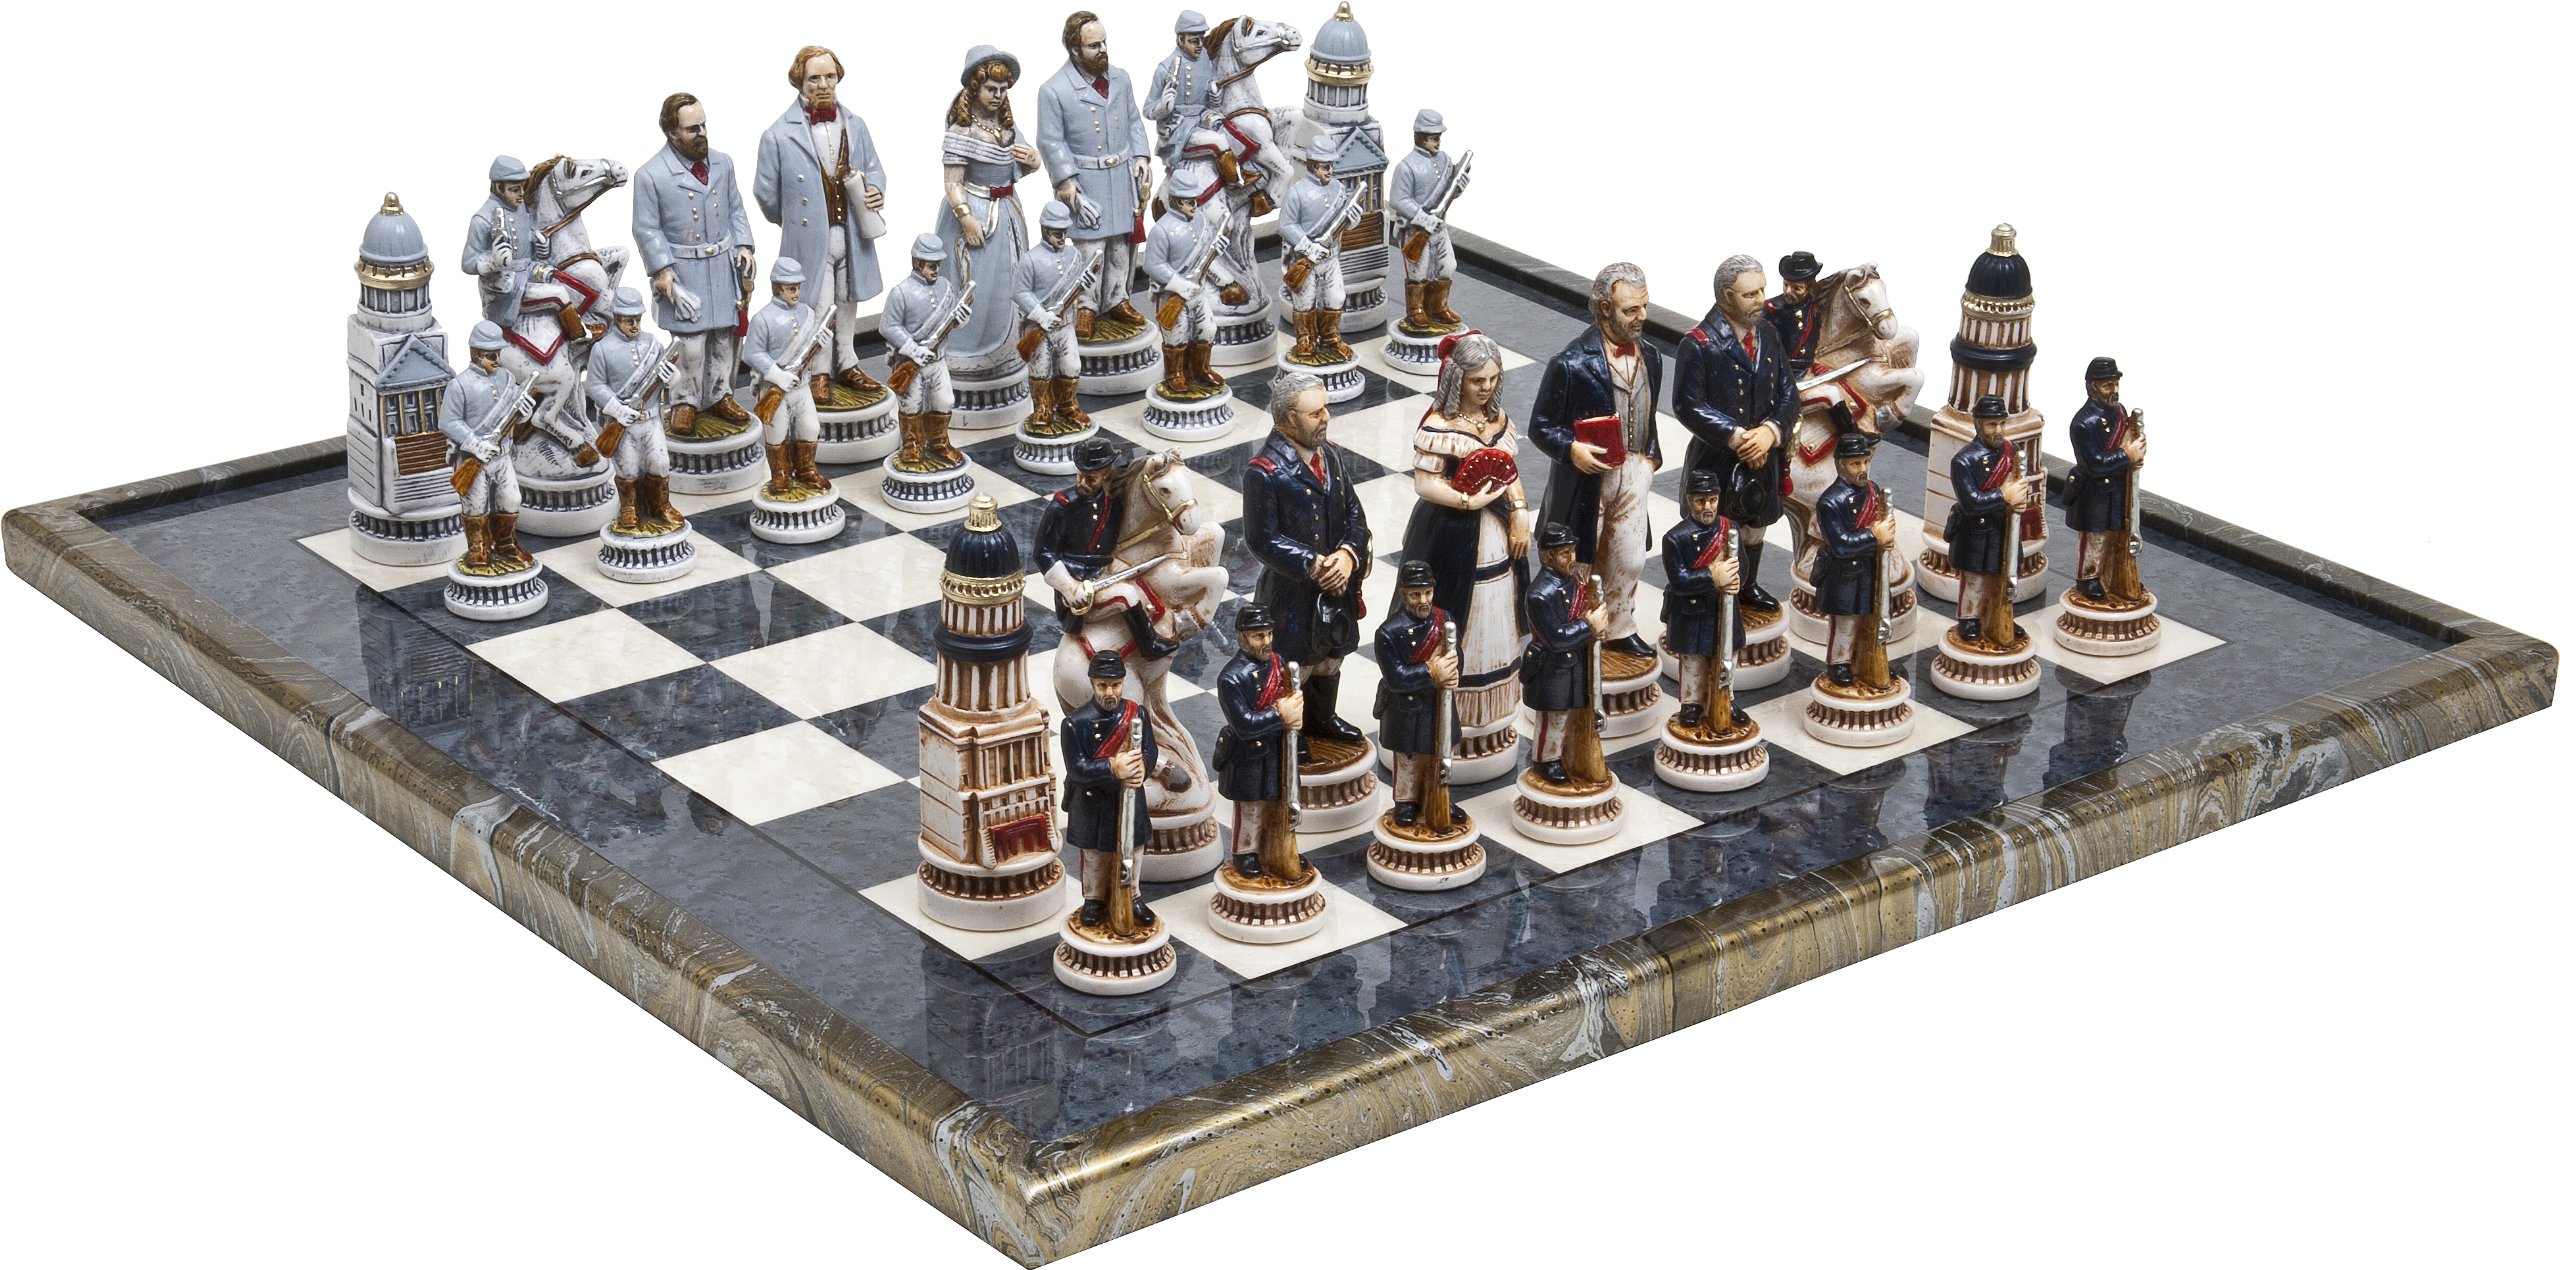 Bello Games Collezioni-American Civil War Luxury Chessmen & Mancini Chess Board from Italy. Giant Size King: 5 5/8